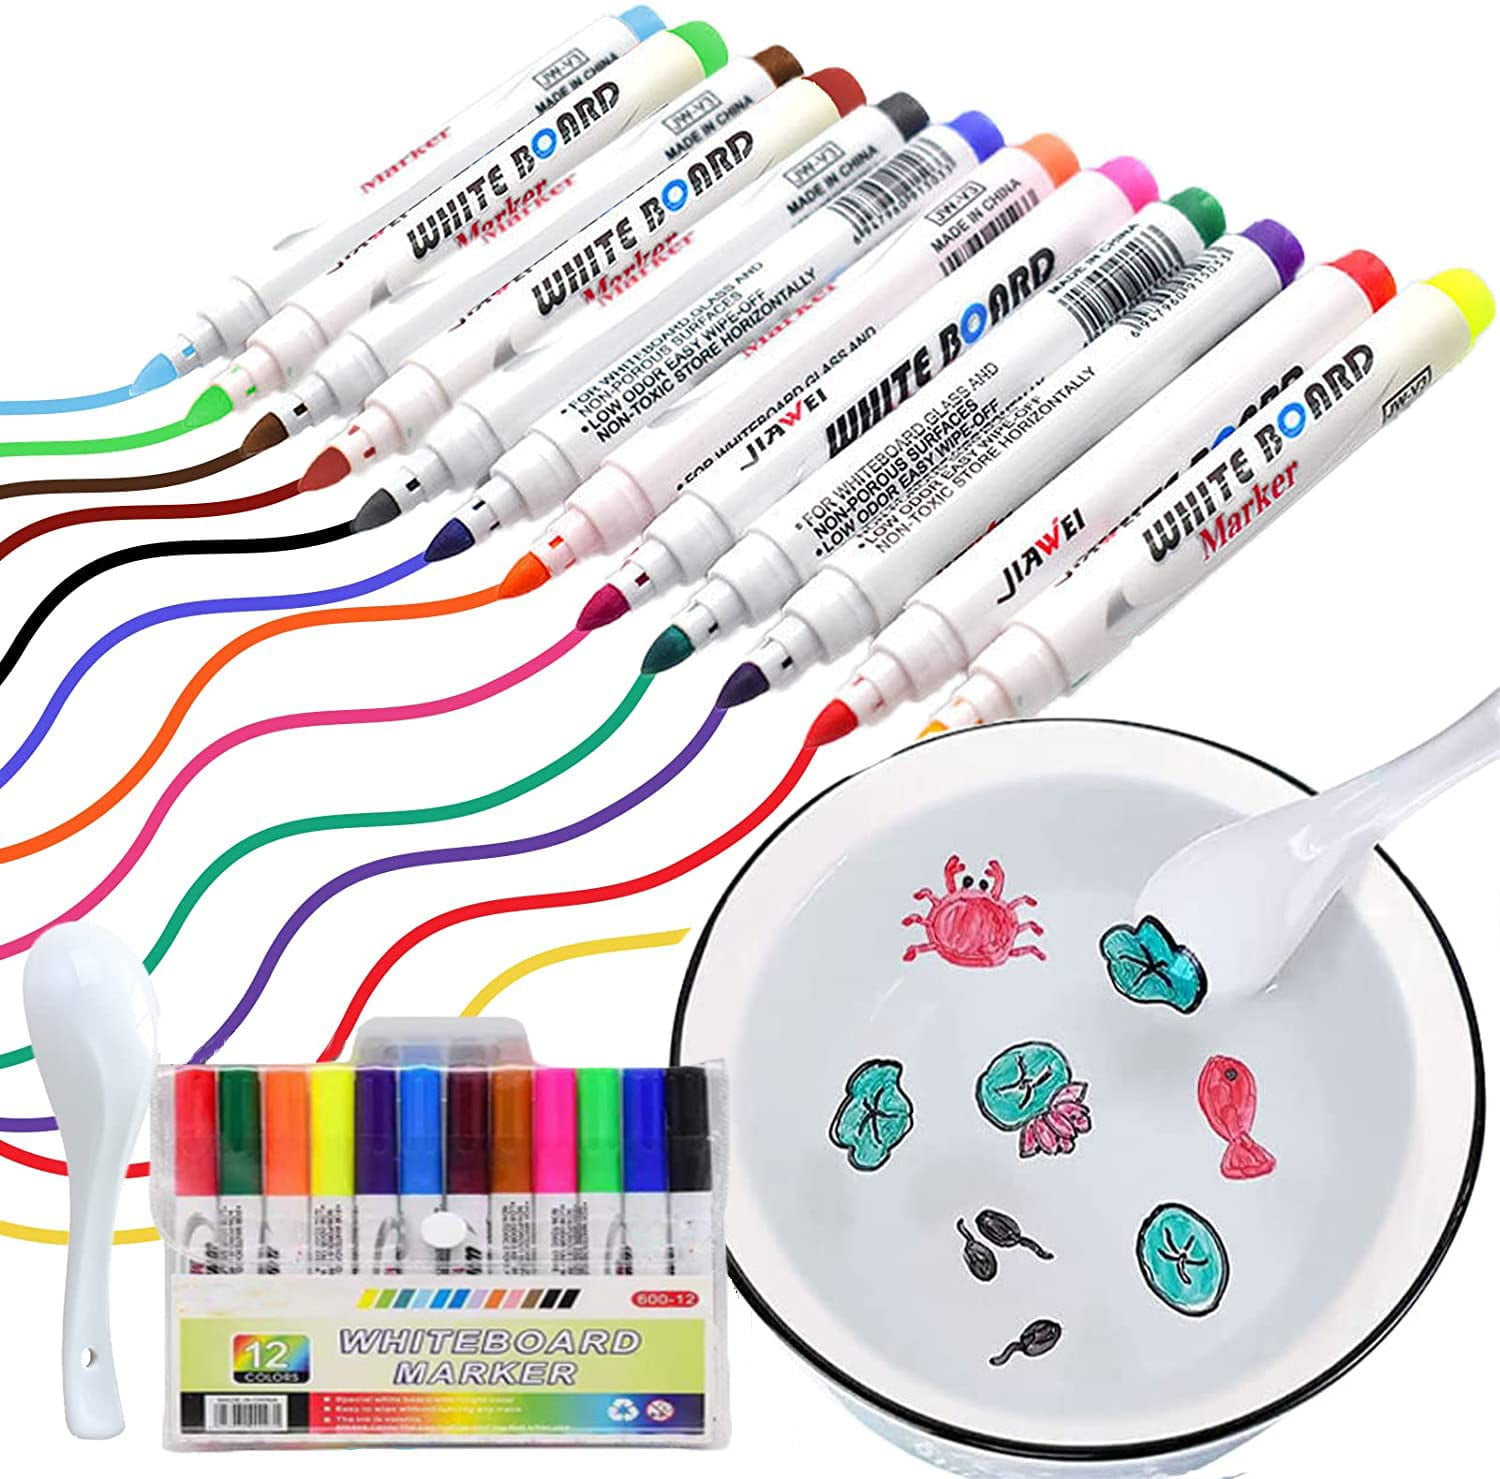 IRWPITW Magical Water Painting Pens for Kids, 12 Colors Magic Drawing Pen  Bundle, Kiddies Create Magic Pen Floating Ink Drawings Set with Spoons and